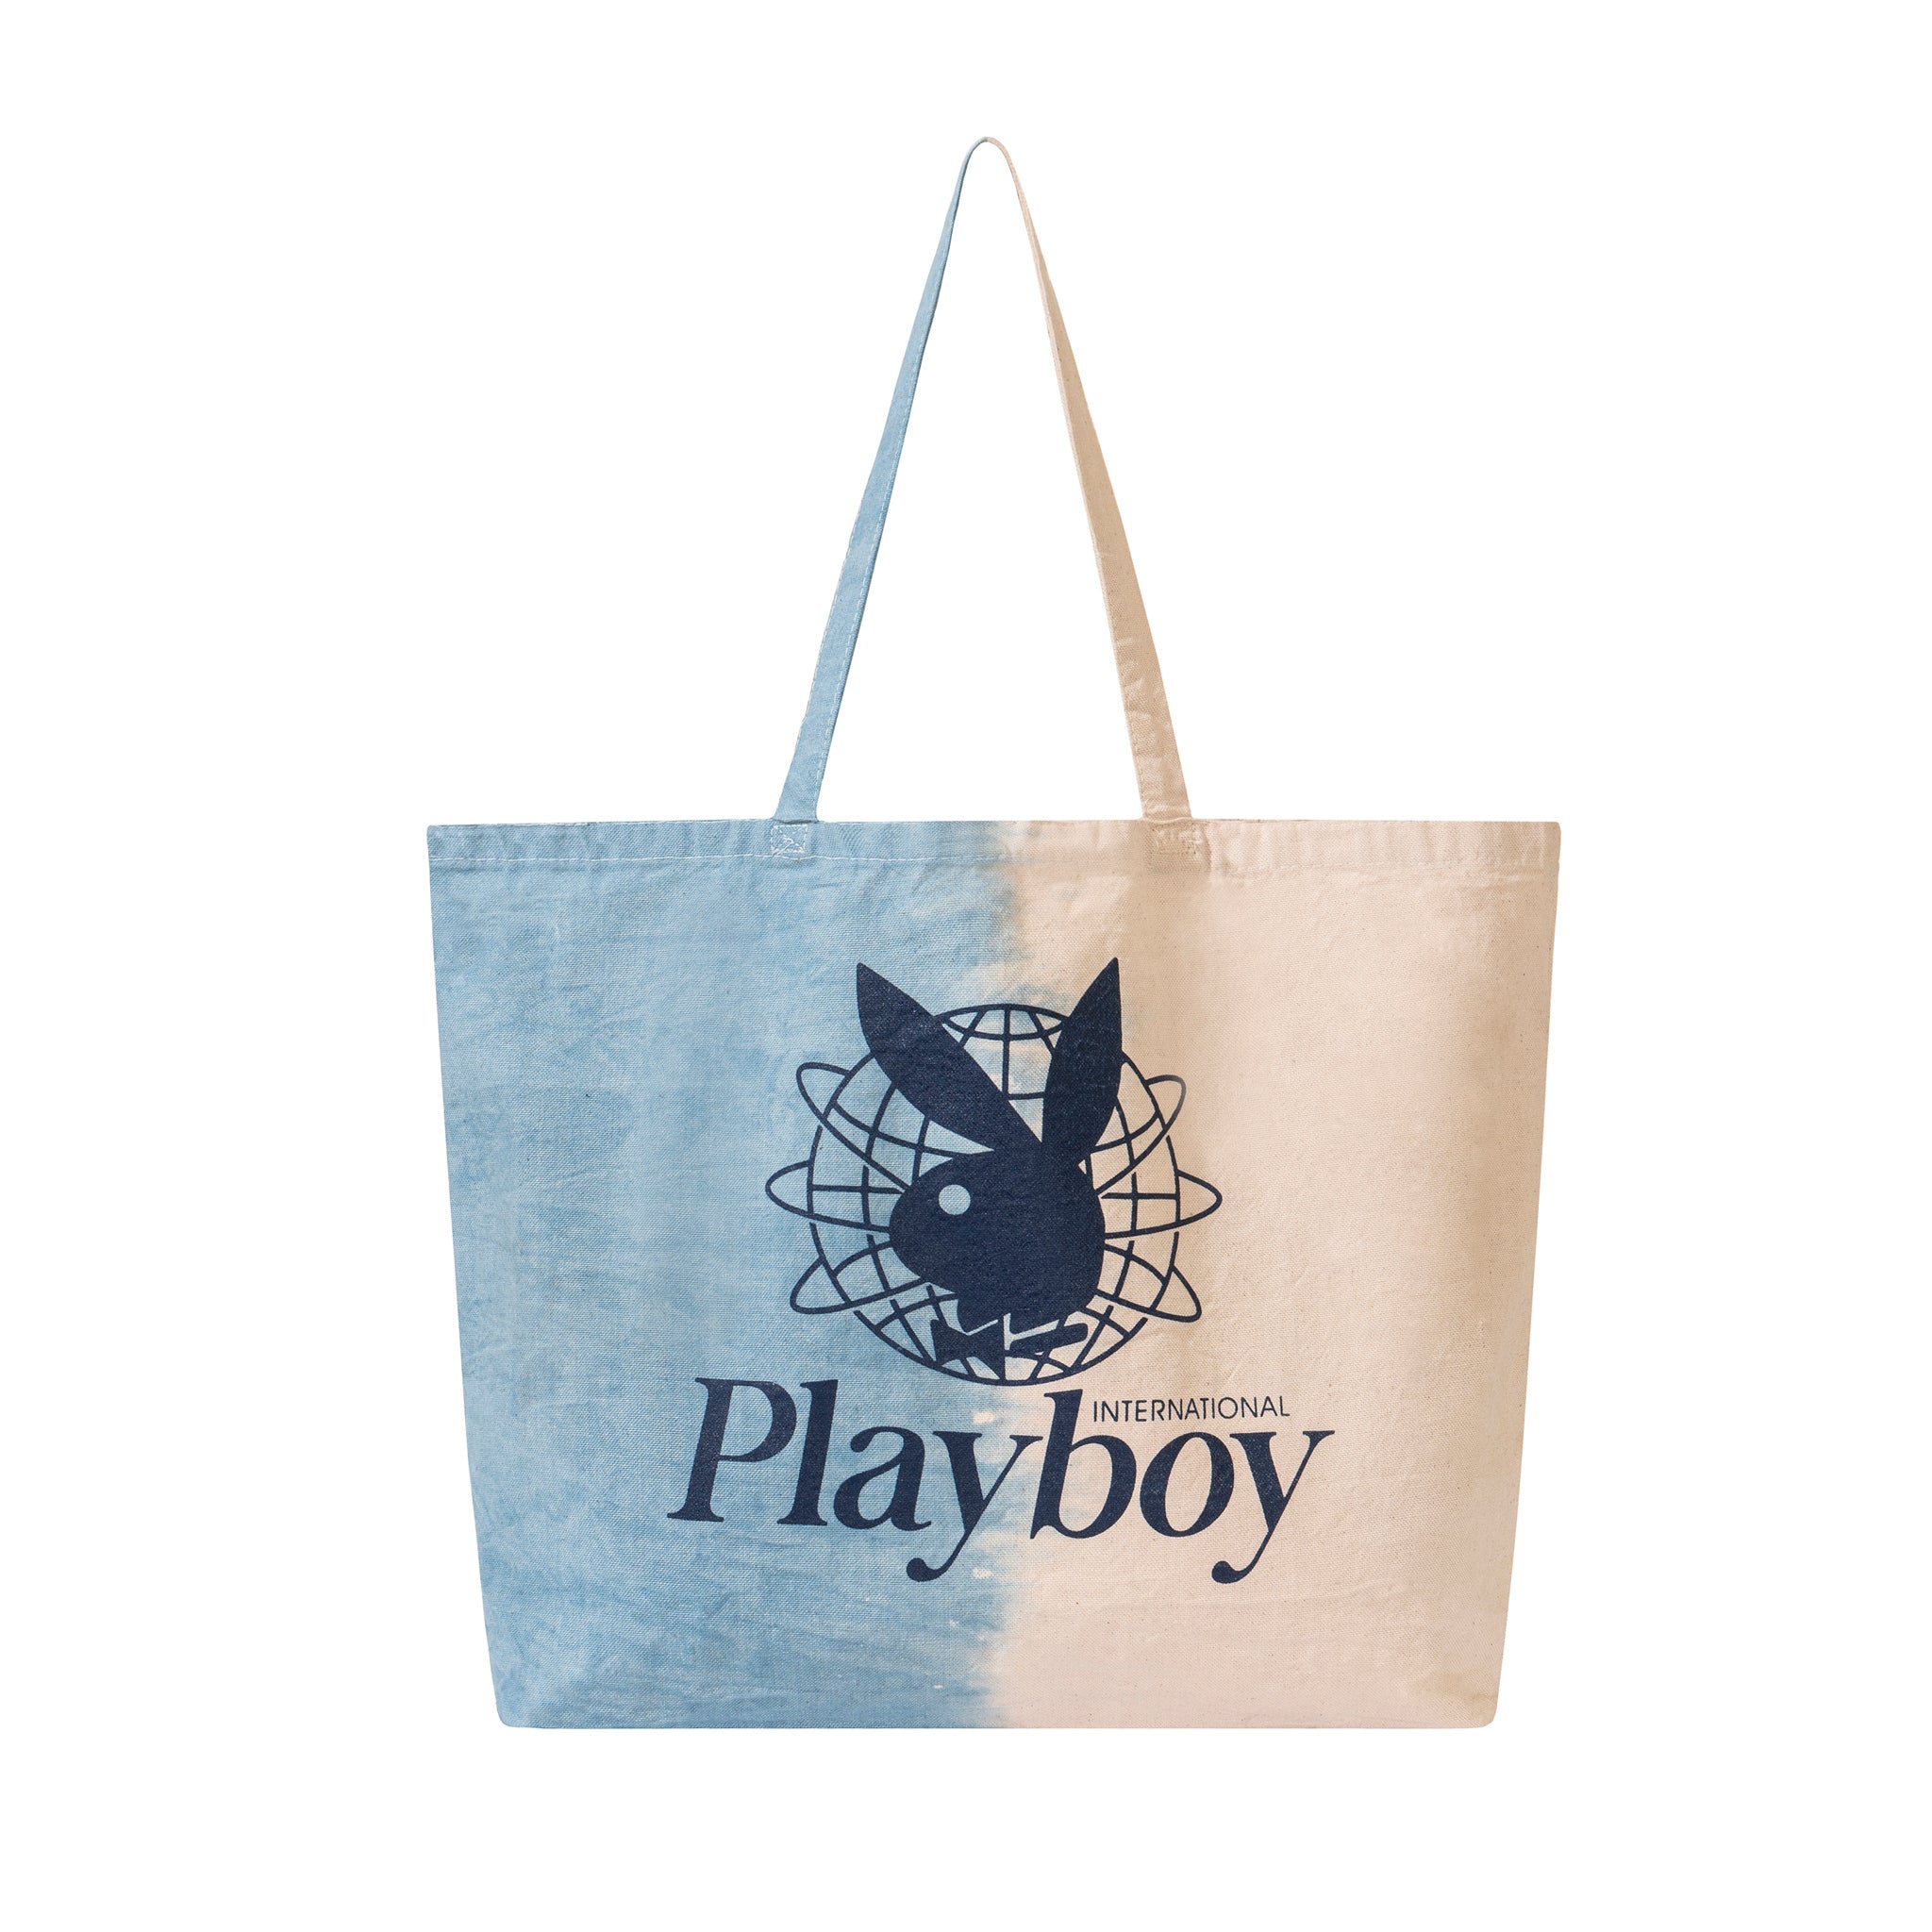 Unisex Bags and Women's Clutches | Official Playboy Accessories